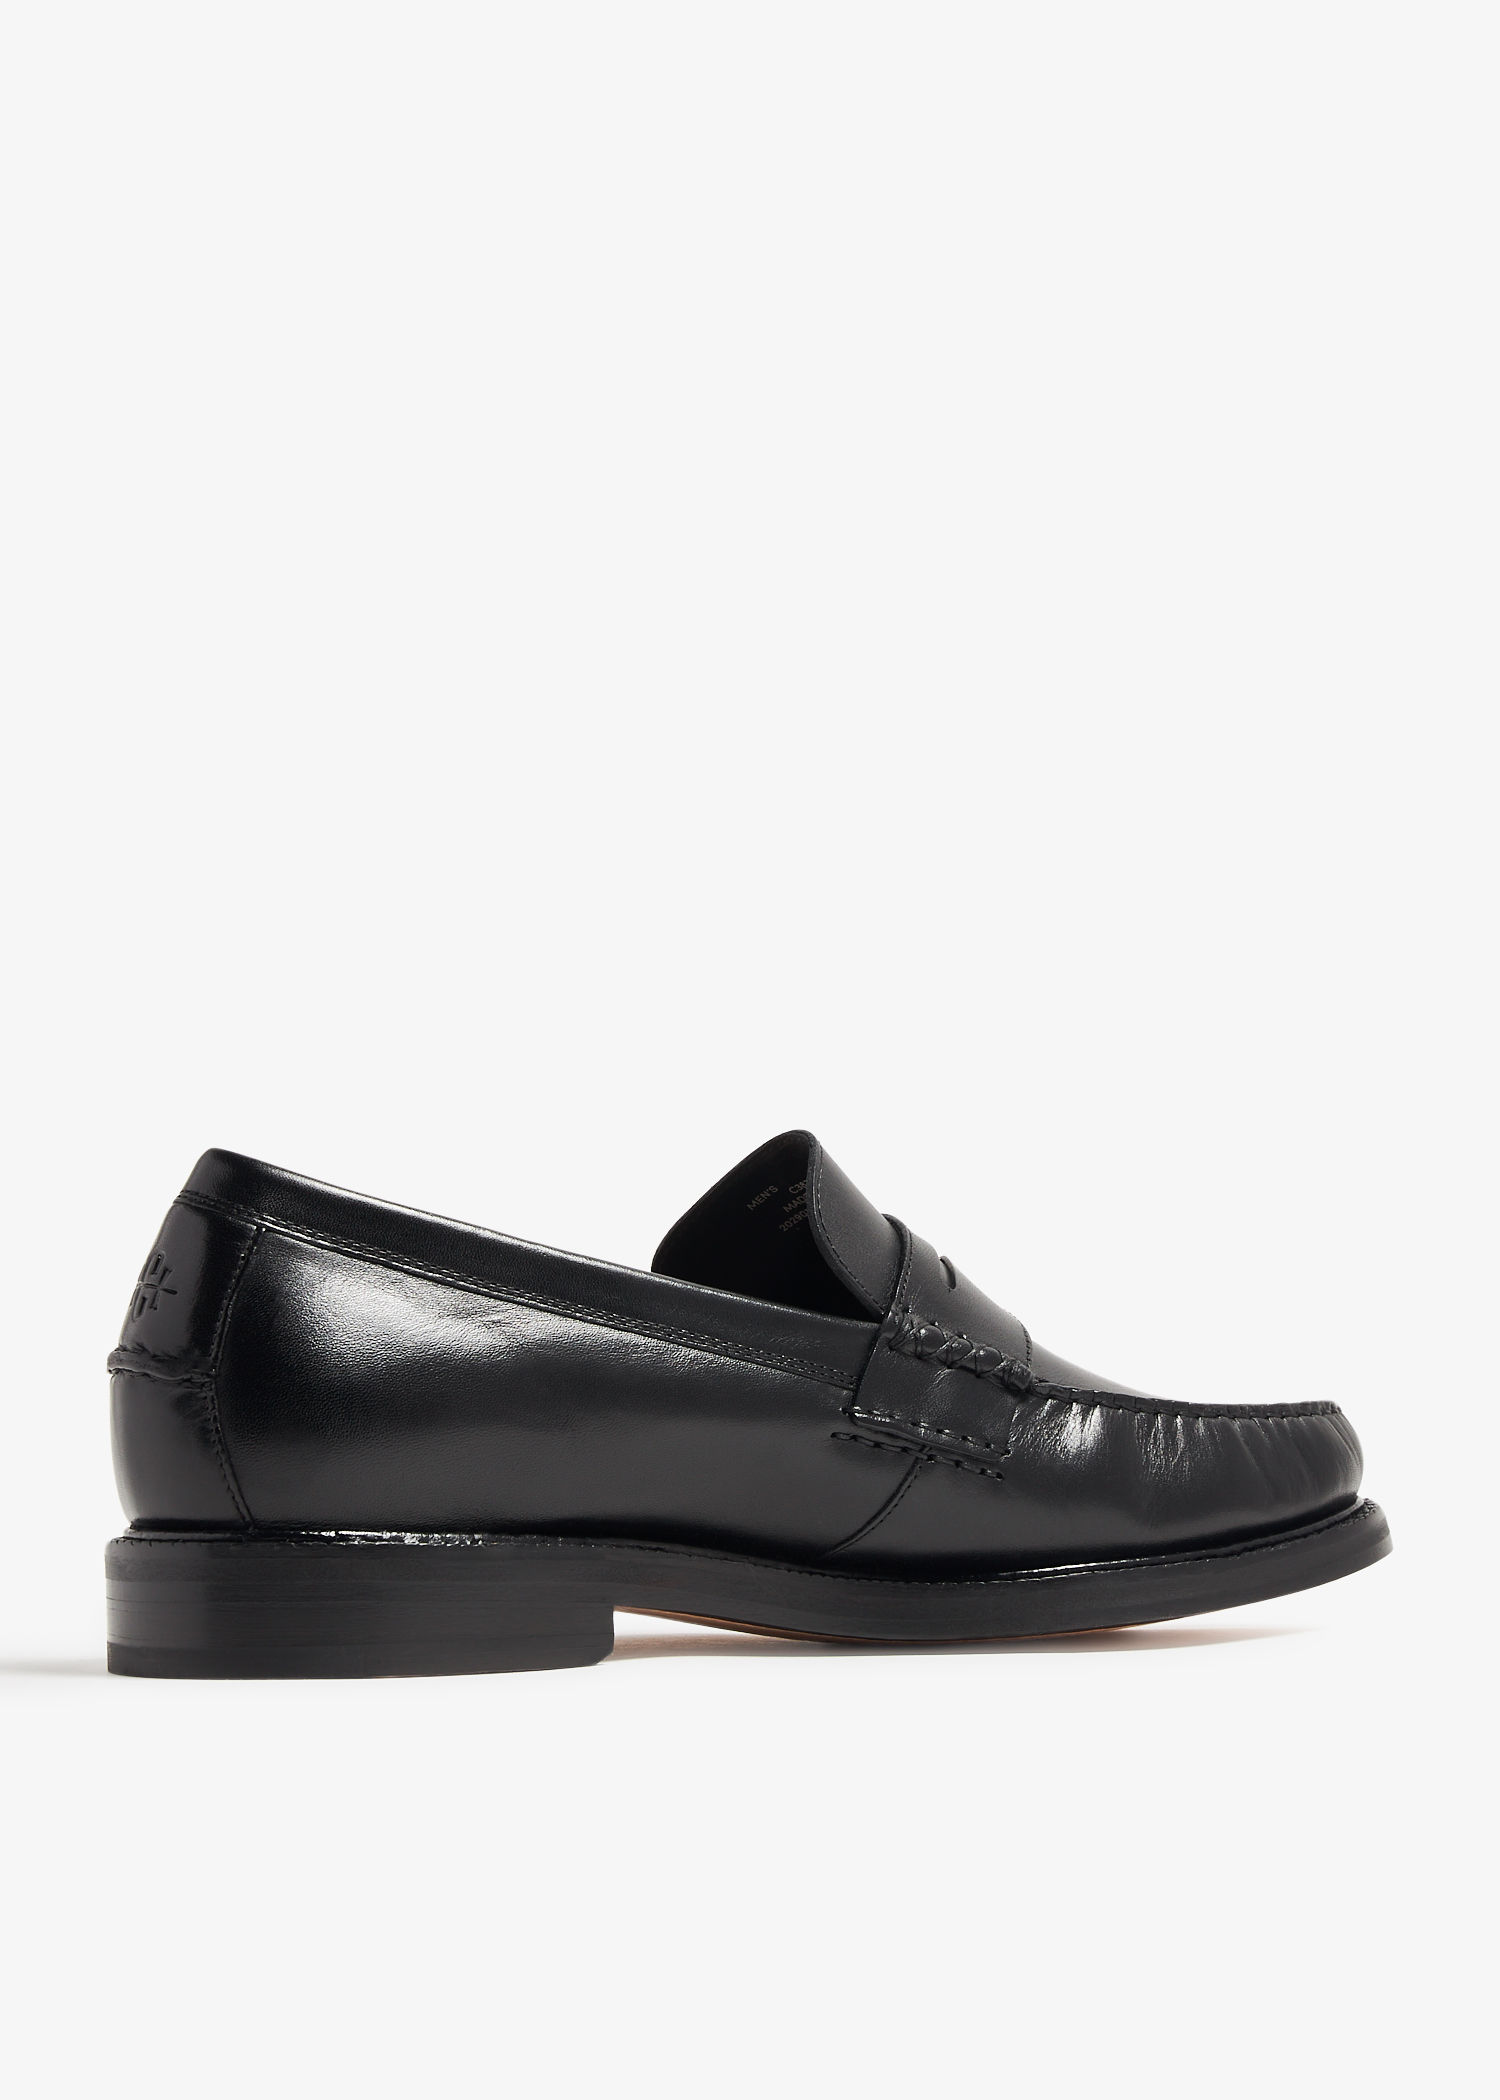 Cole Haan American Classics Pinch Penny loafers for Men - Black in